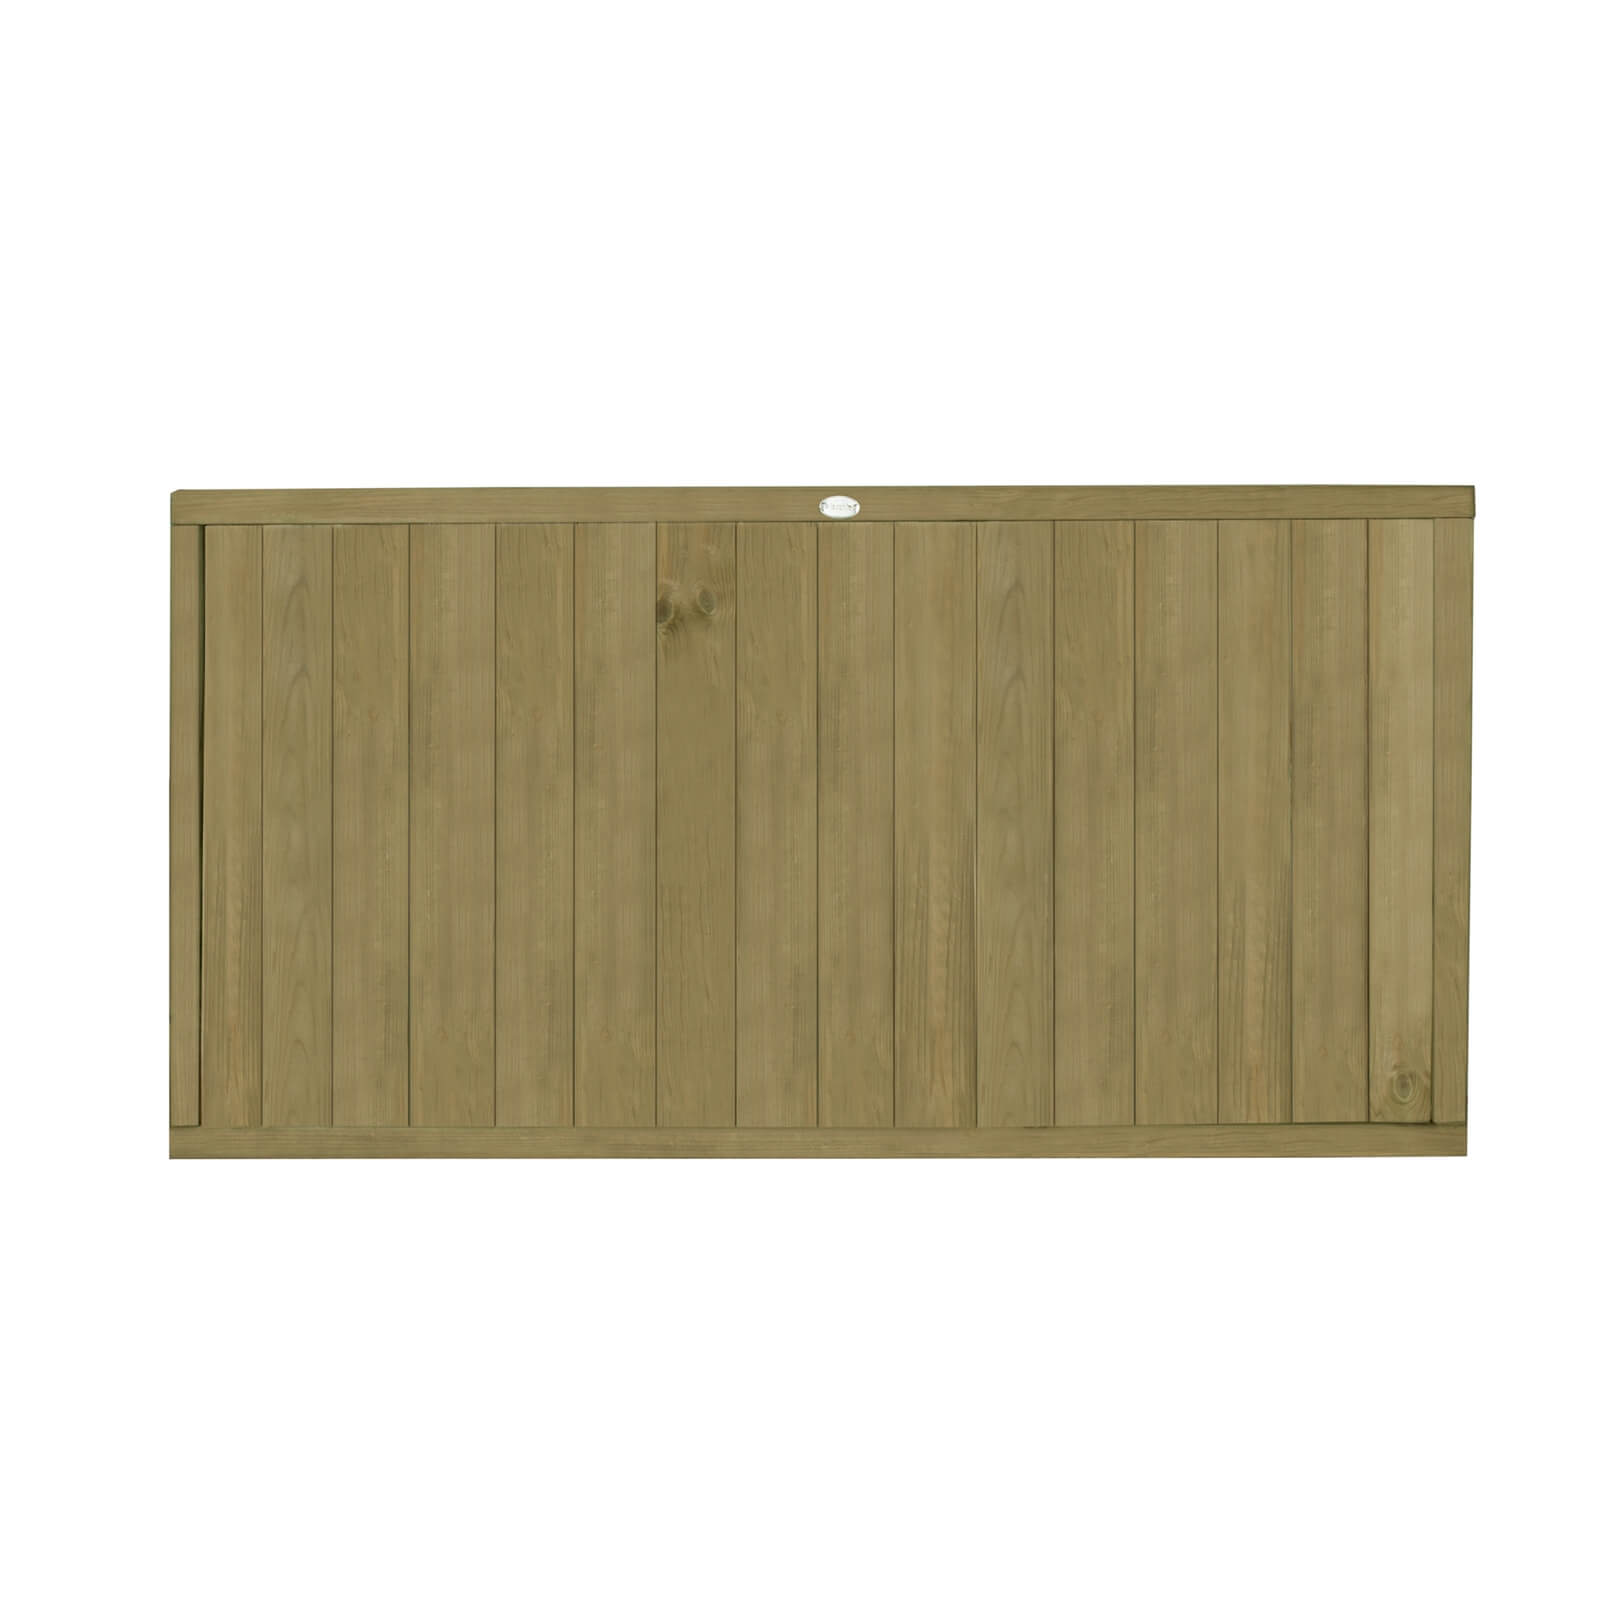 Forest Vertical Tongue & Groove Fence Panel - 3ft - Pack of 5